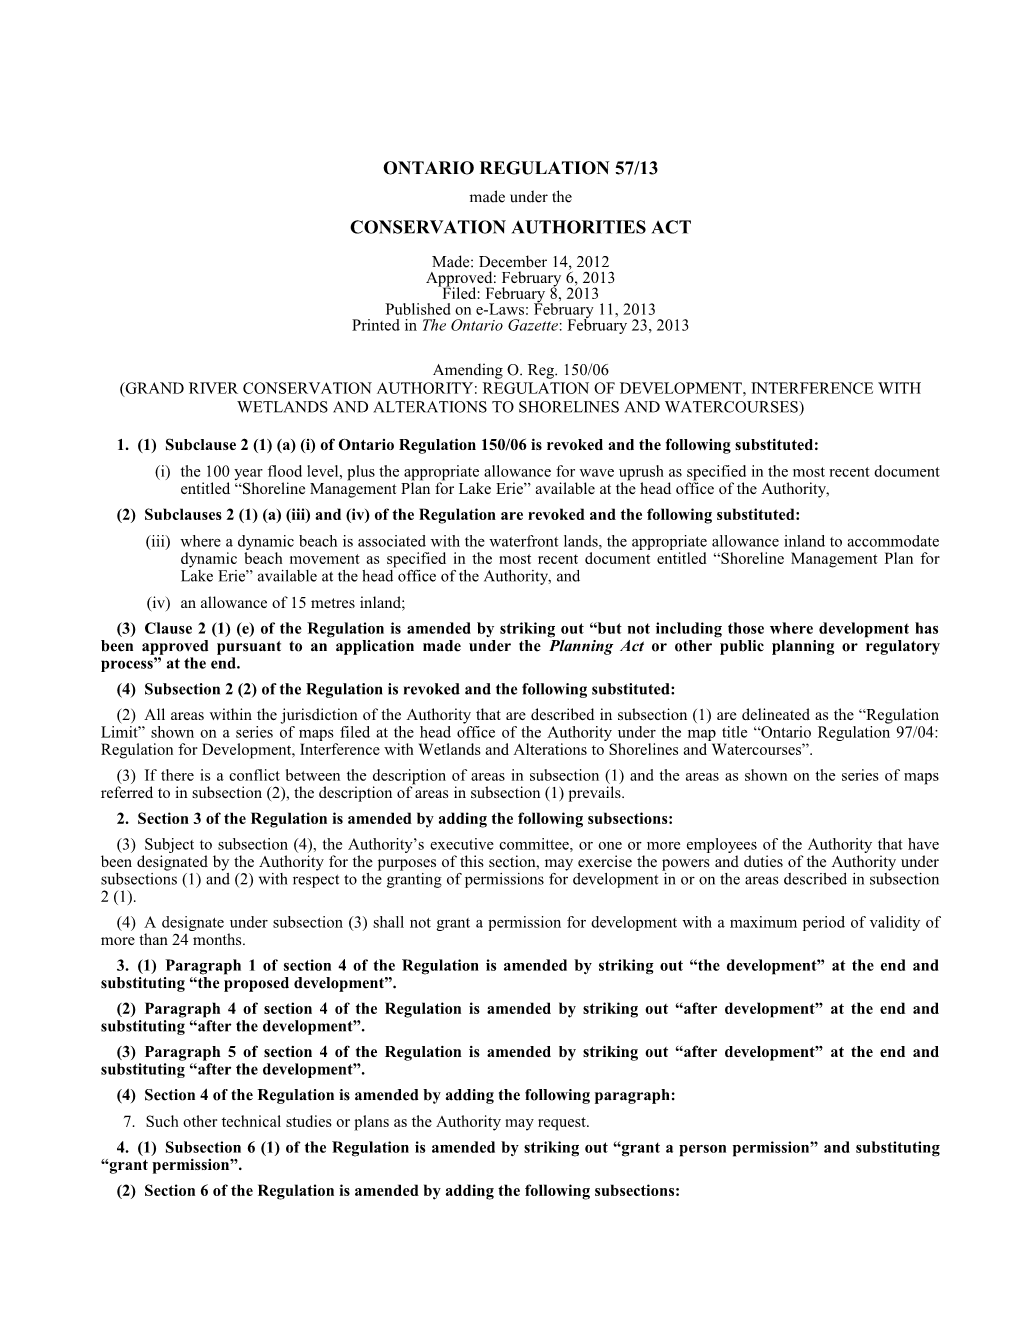 CONSERVATION AUTHORITIES ACT - O. Reg. 57/13